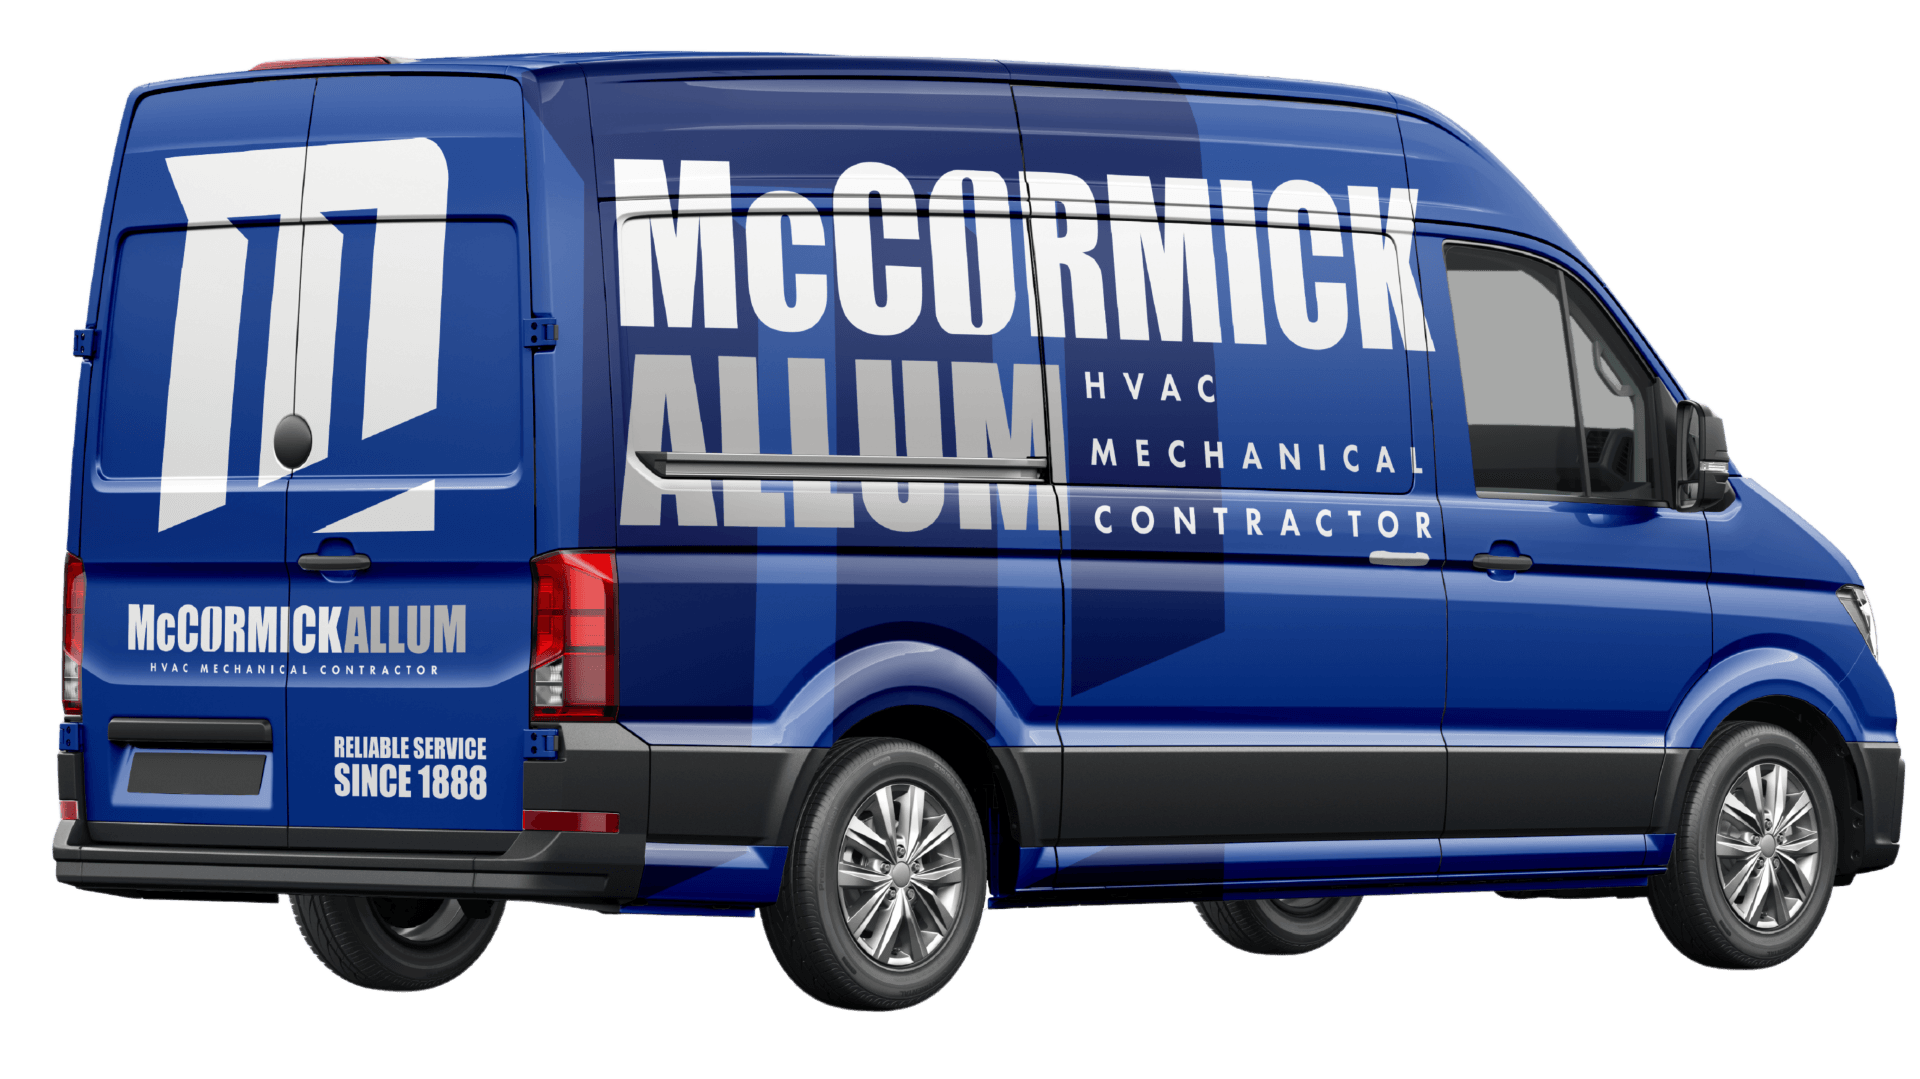 Heating and Cooling Contractors in Springfield, MA